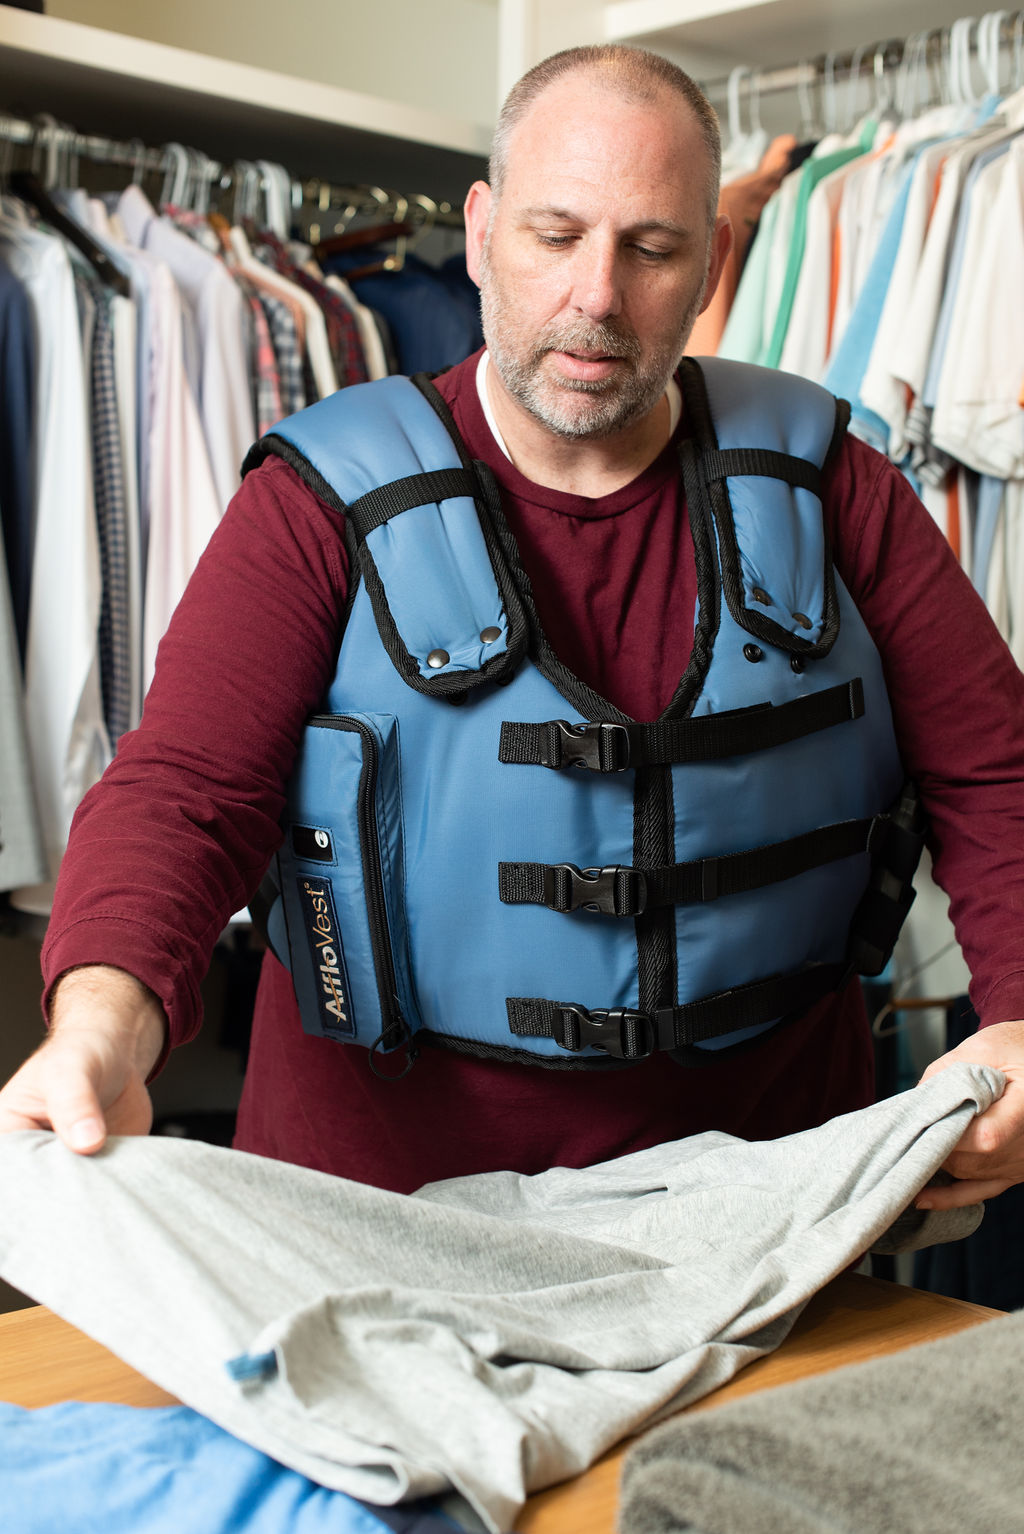 man wearing an afflovest and folding laundry